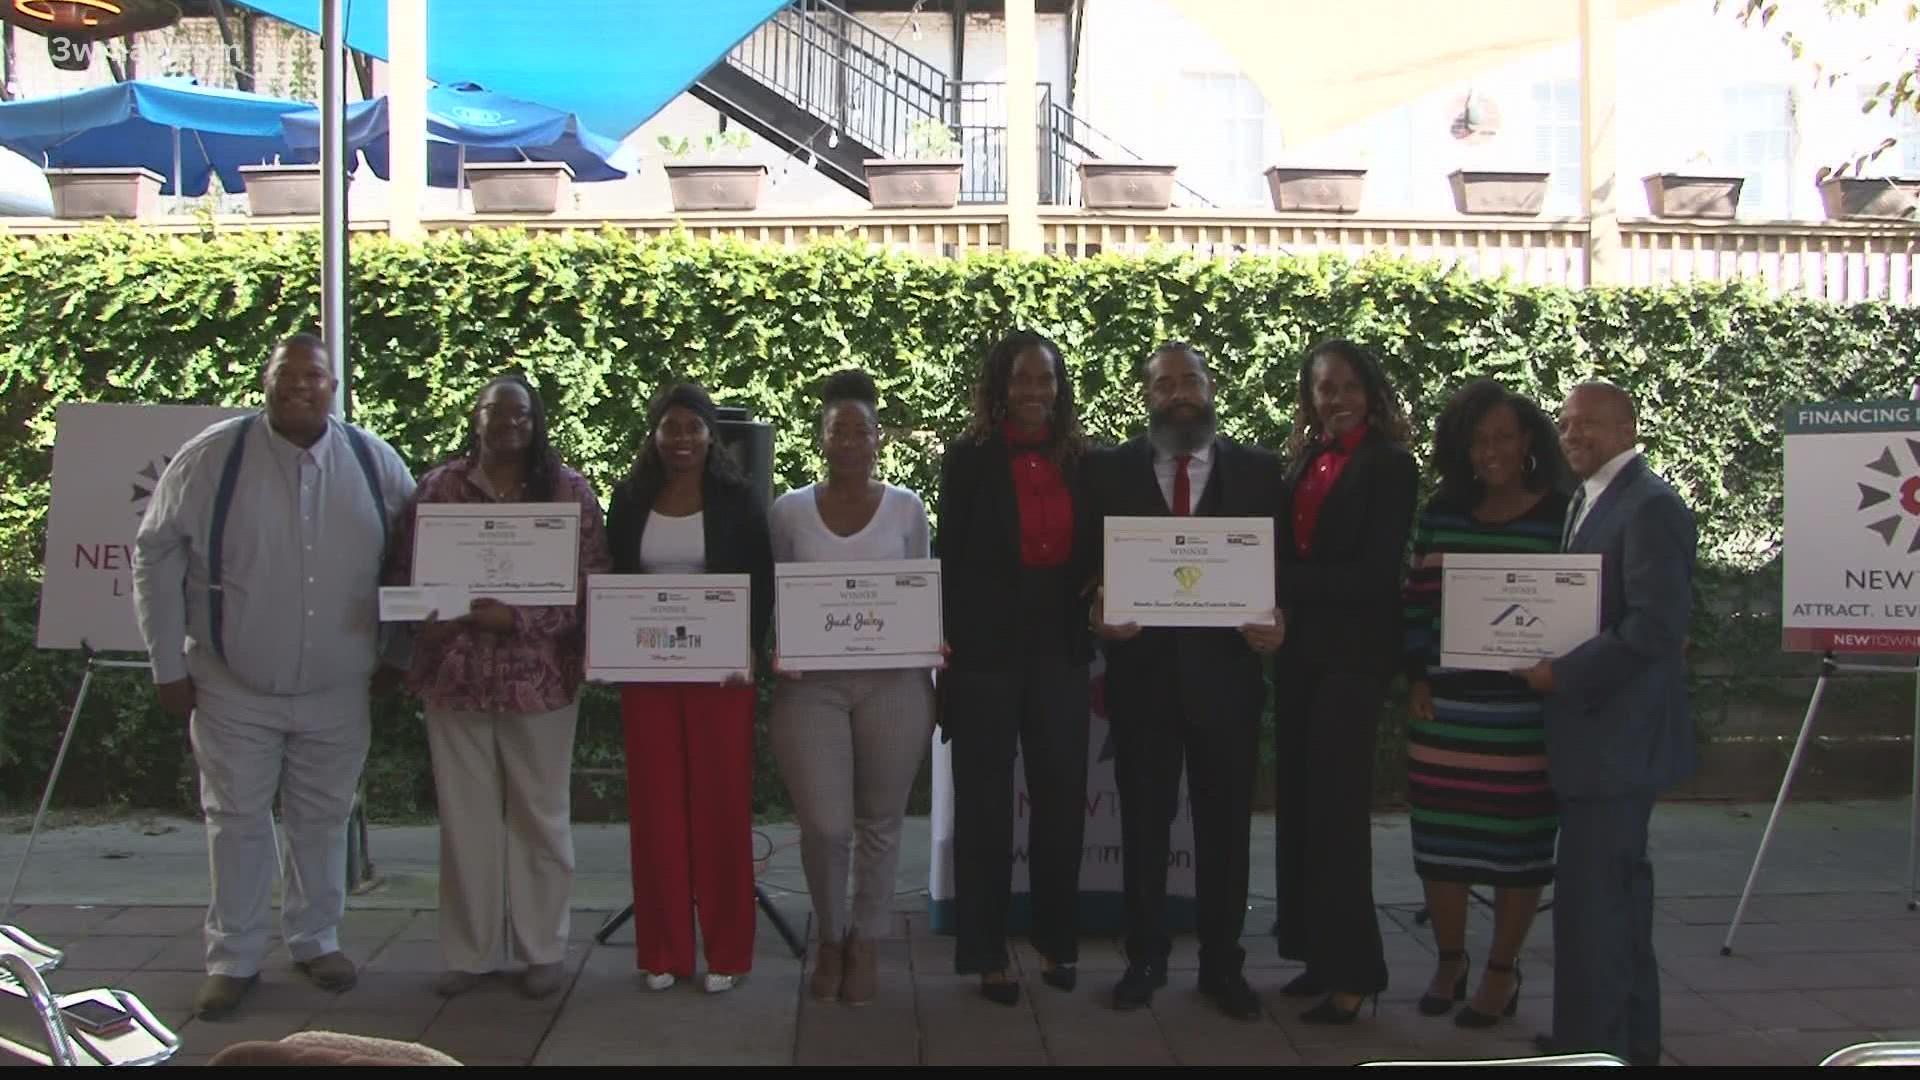 The five graduates were awarded $5,000 to help start up or expand their current businesses.